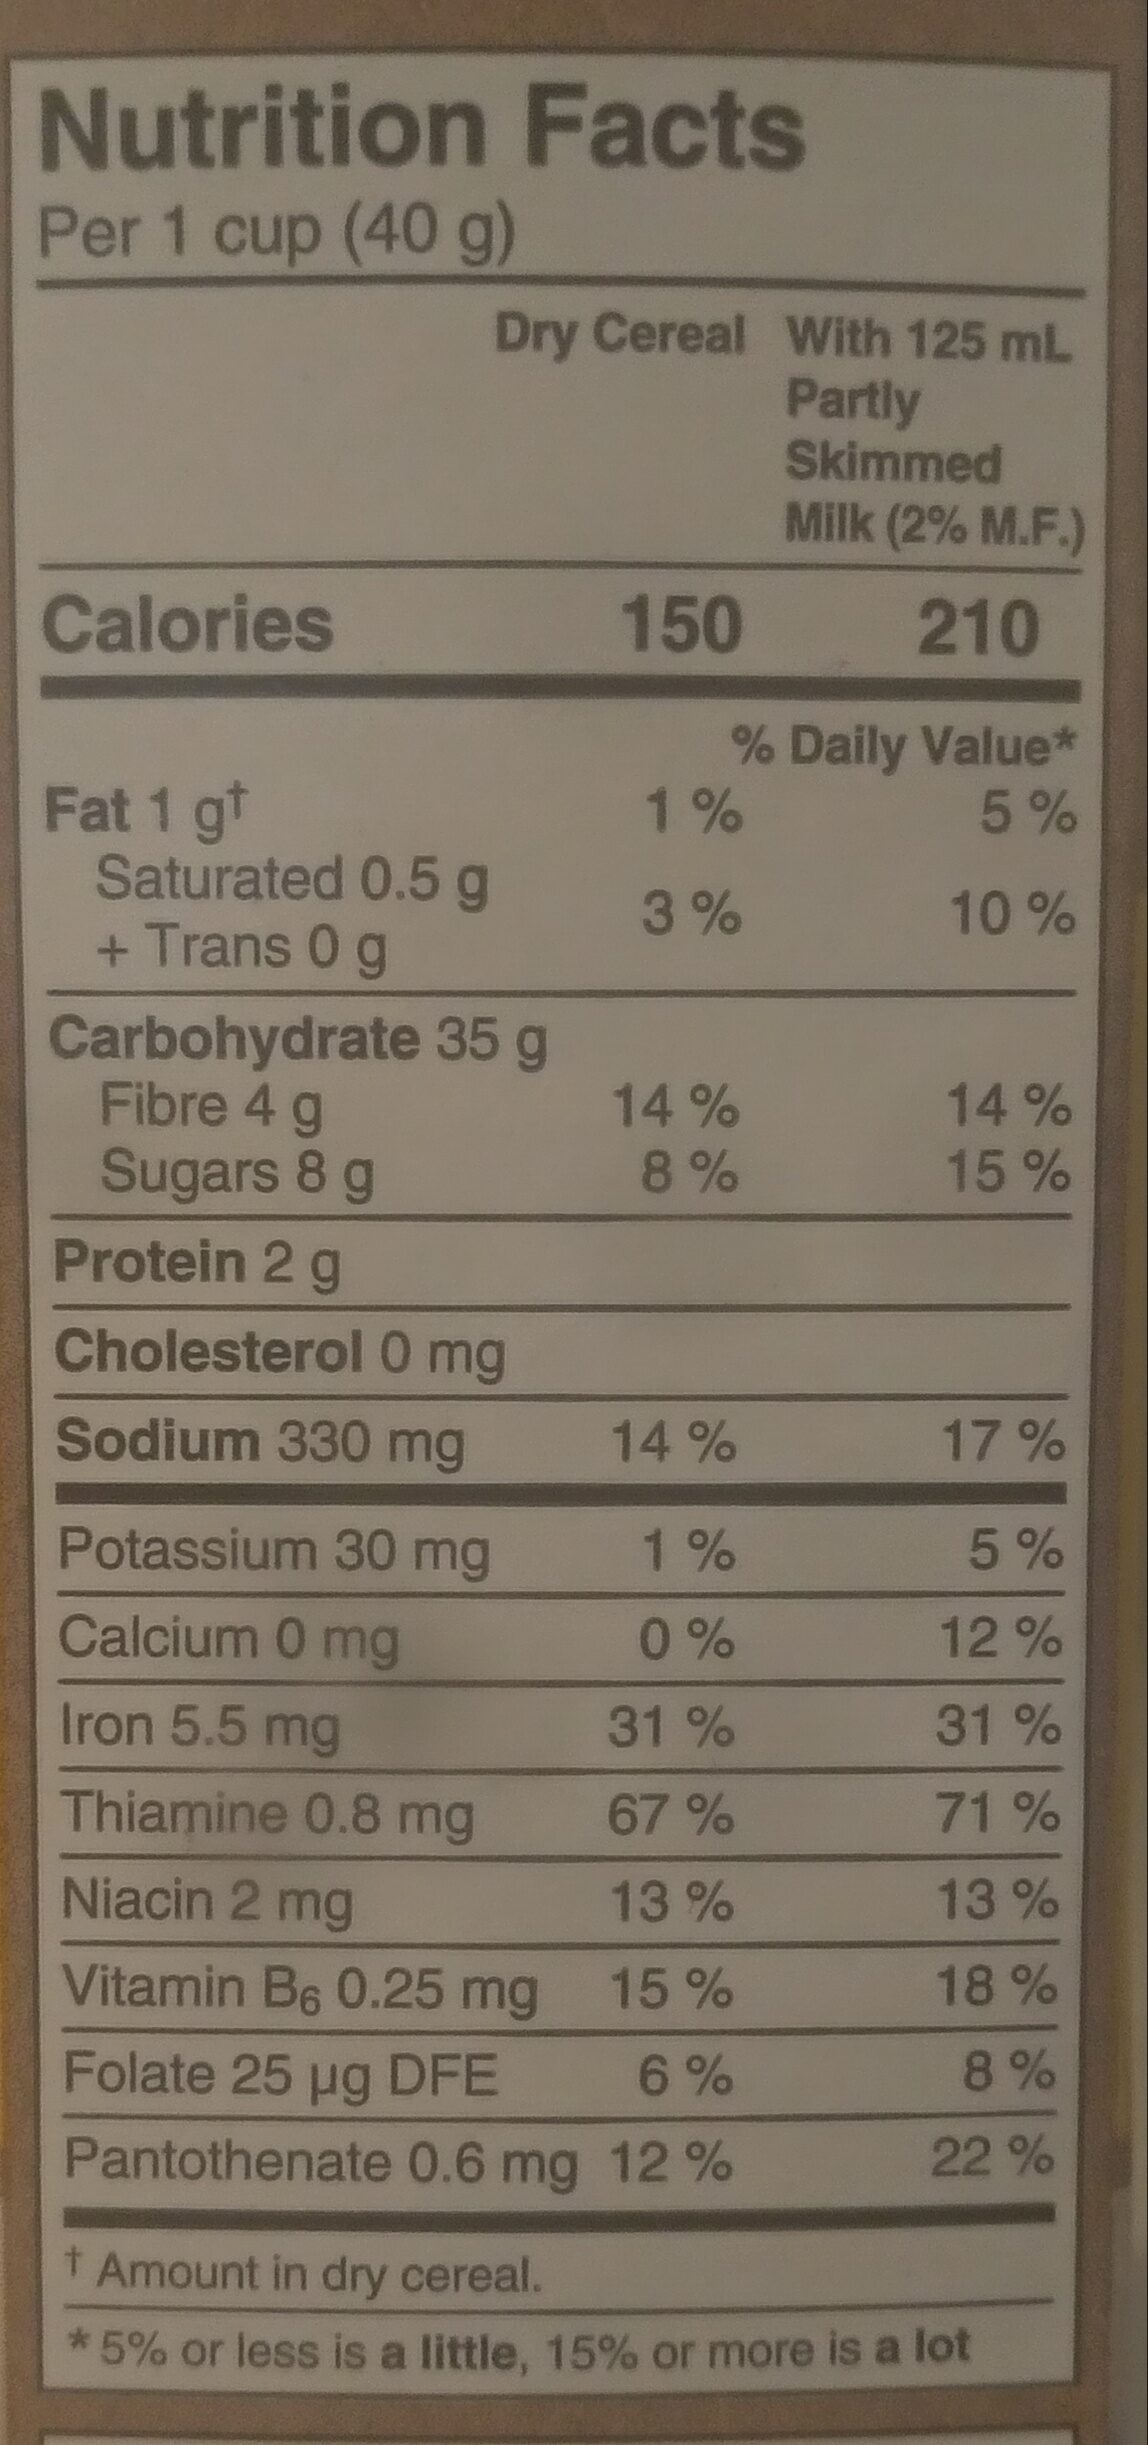 Corn Squares Toasted Cereal - Nutrition facts